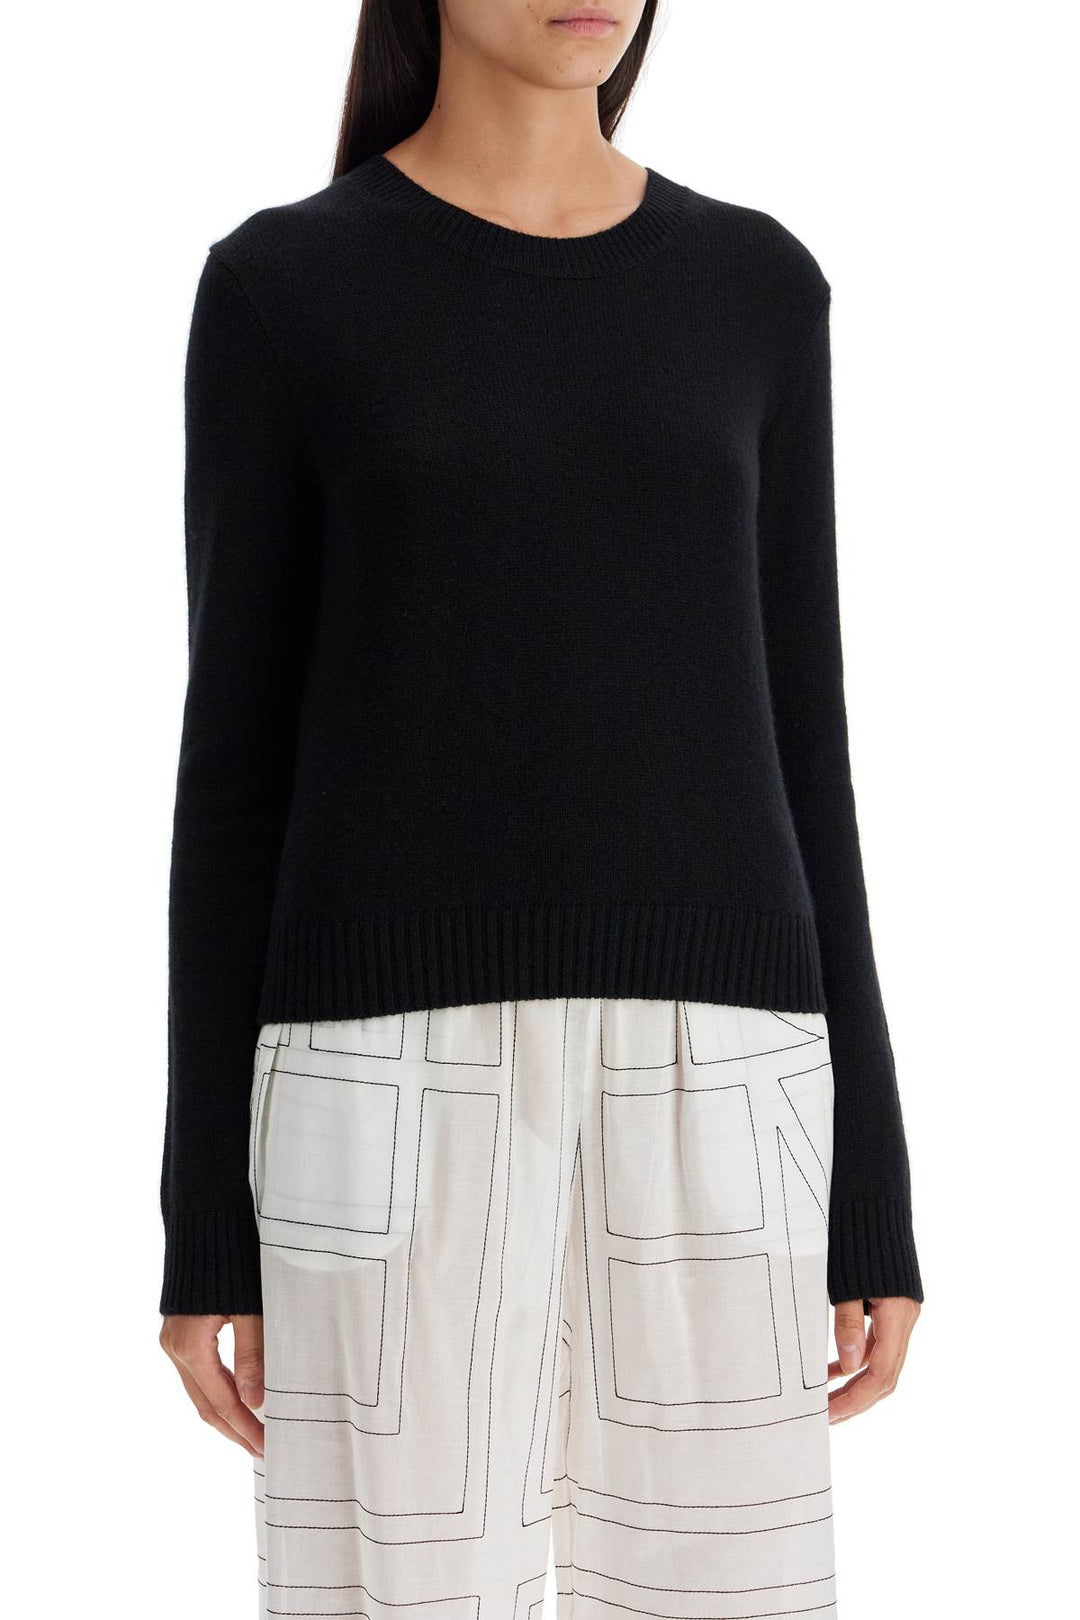 Lisa Yang Cashmere Mable Pullover   Black